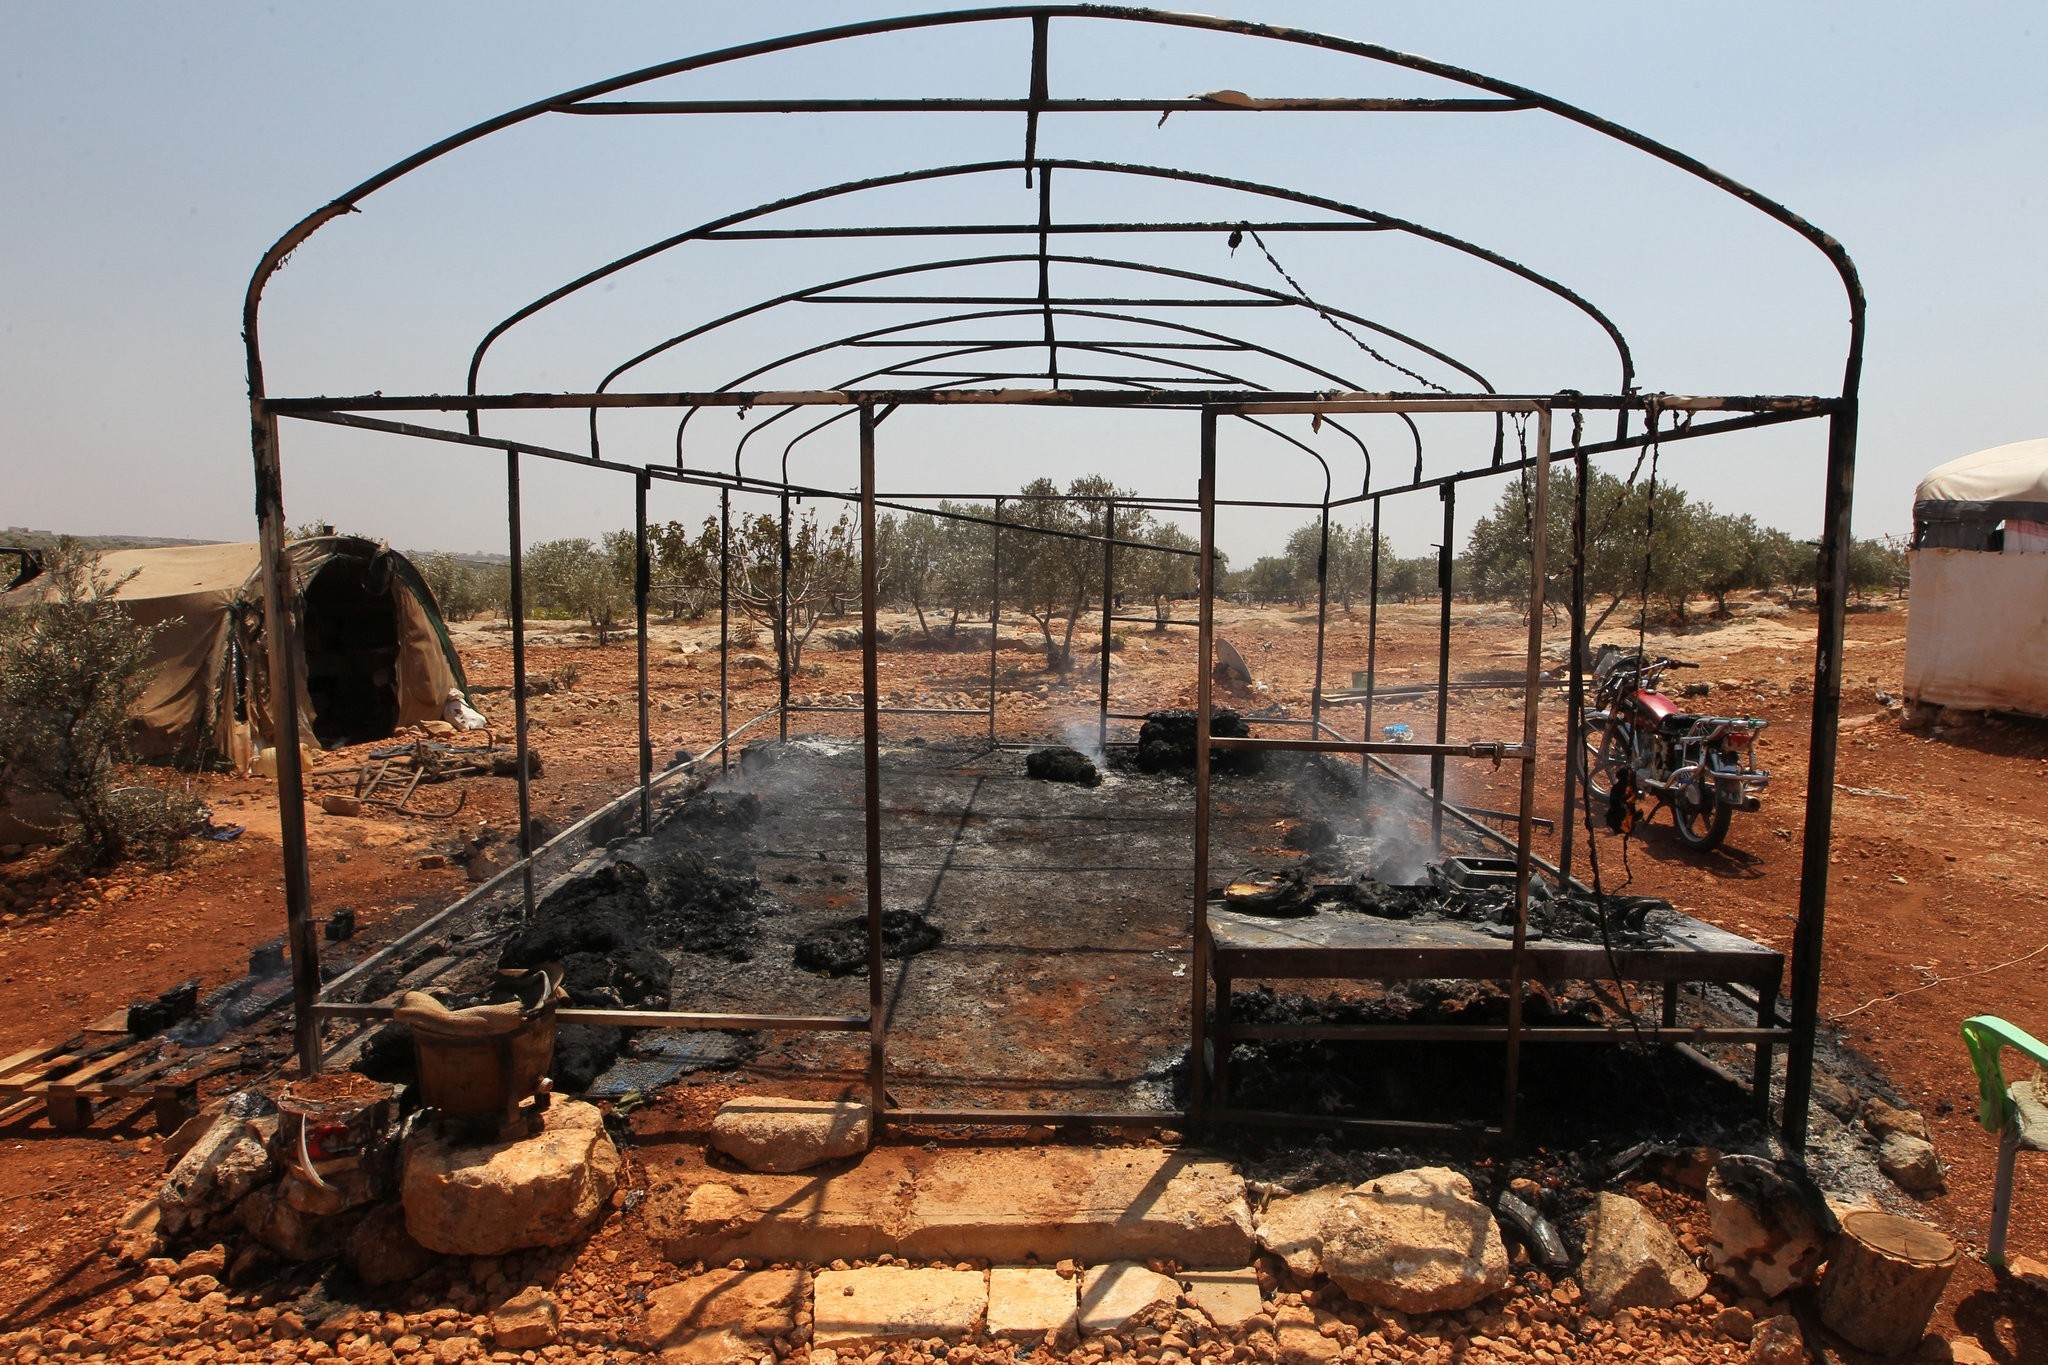 A burnt tent for displaced people is pictured after airstrikes on the outskirts of the rebel-held town of Atareb in Aleppo province, Syria August 4, 2016. (REUTERS Photo)